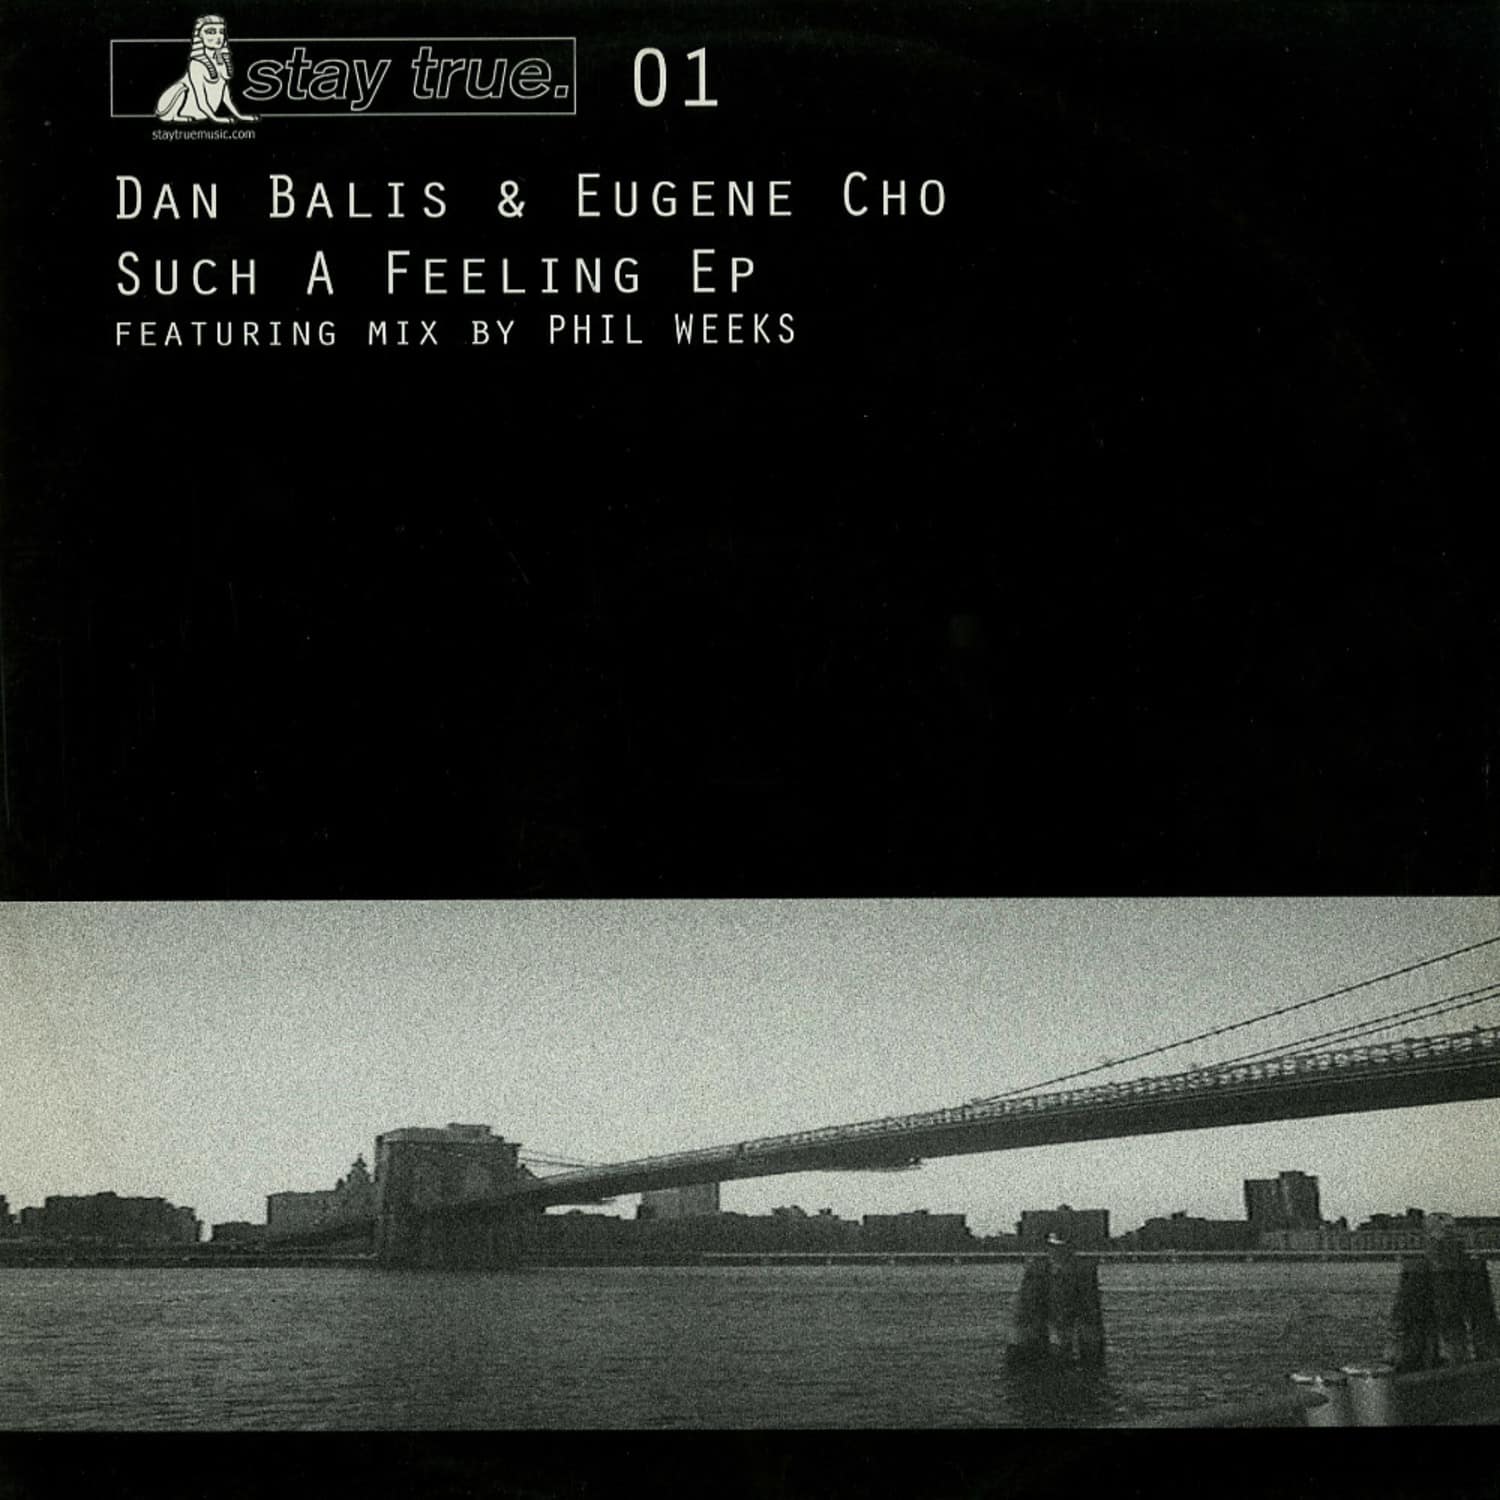 Dan Balis & Eugene Cho feat. Phill Weeks - SUCH A FEELING EP